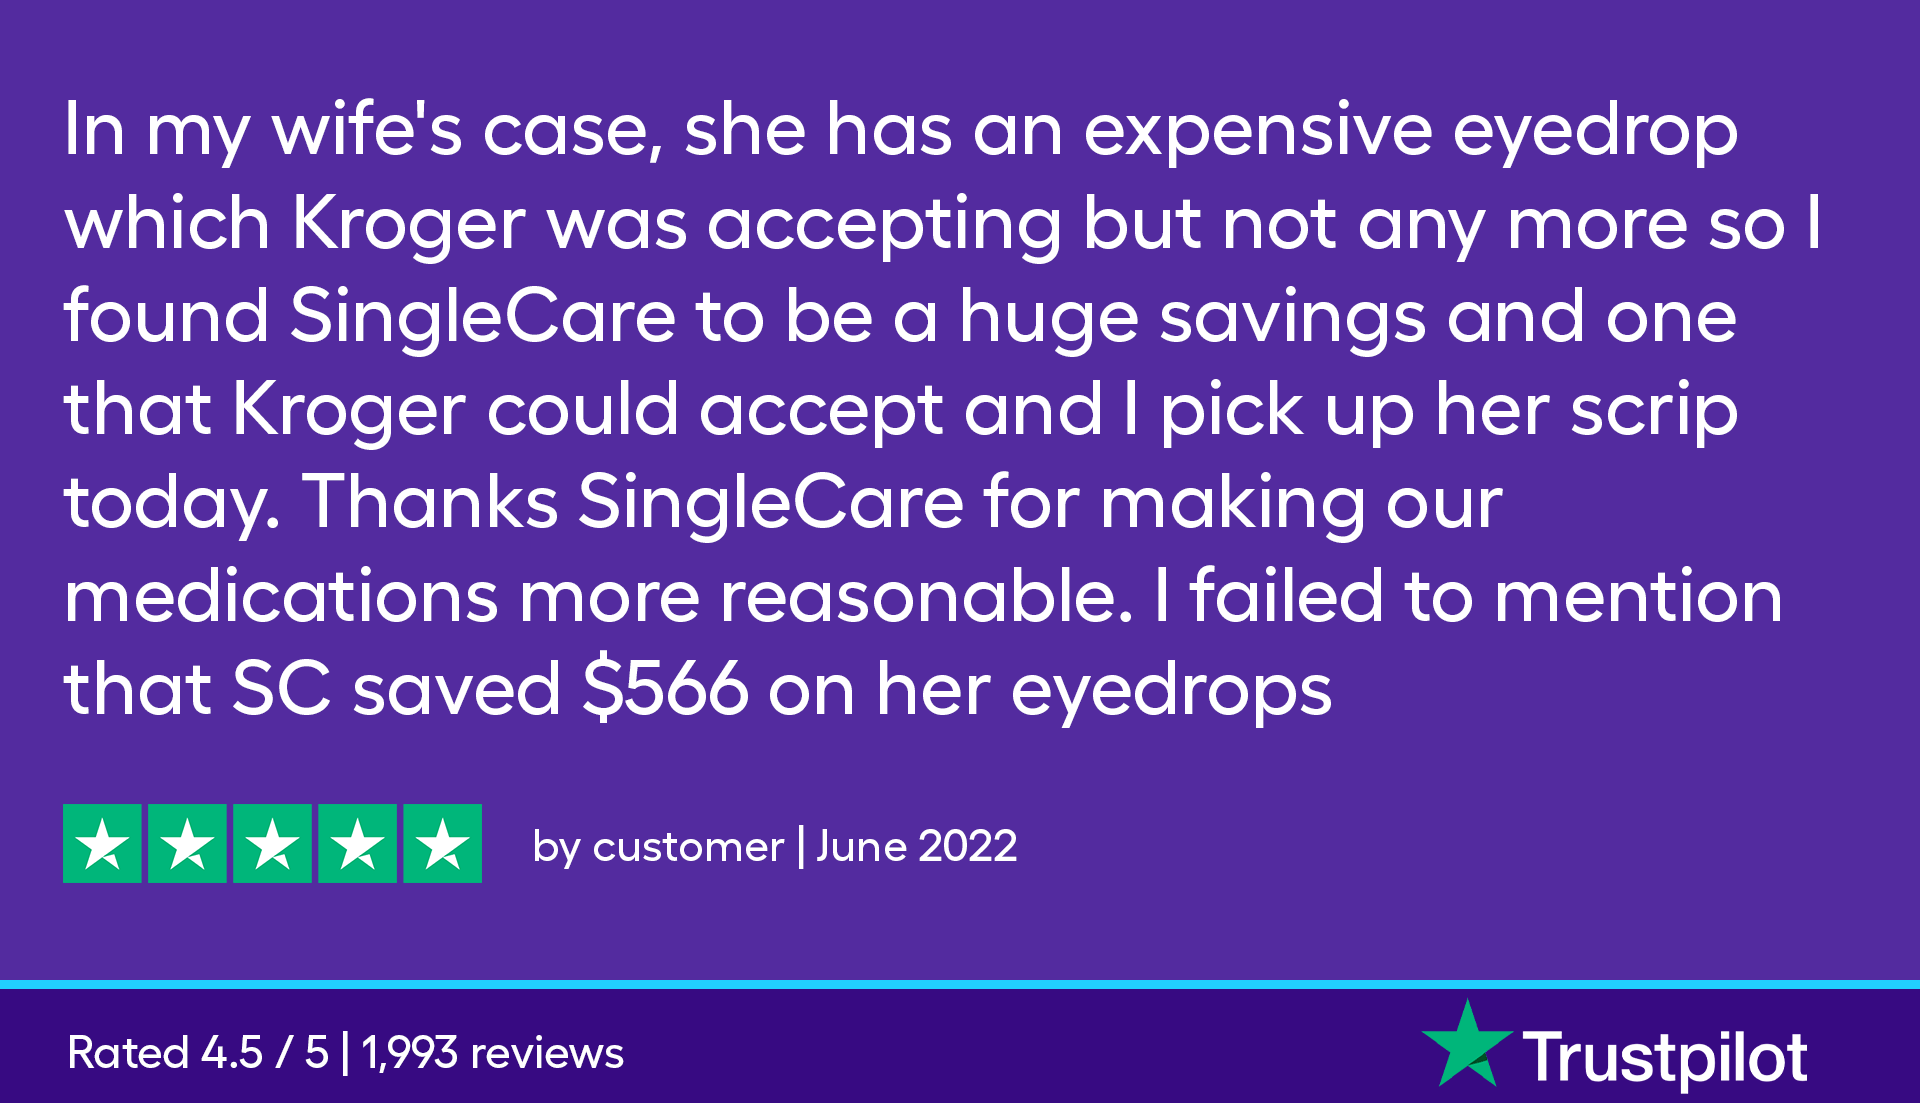 In my wife's case, she has an expensive eyedrop which Kroger was accepting but not any more so I found SingleCare to be a huge savings and one that Kroger could accept and I pick up her scrip today. Thanks SingleCare for making our medications more reasonable. I failed to mention that SC saved $566 on her eyedrops